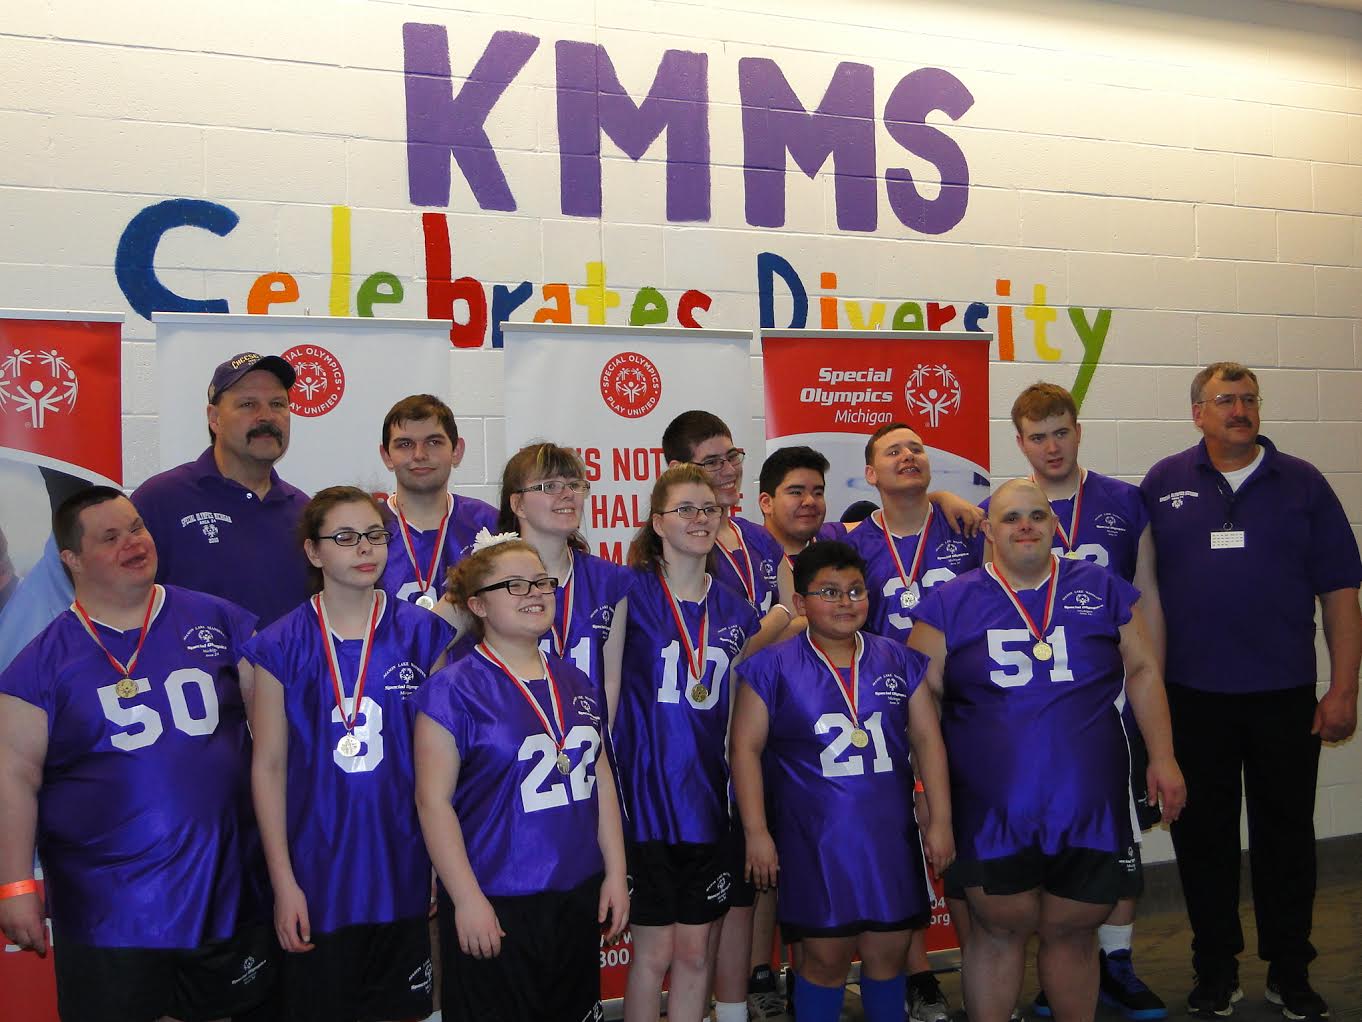 Special Olympics teams play districts, one team will move on to state.